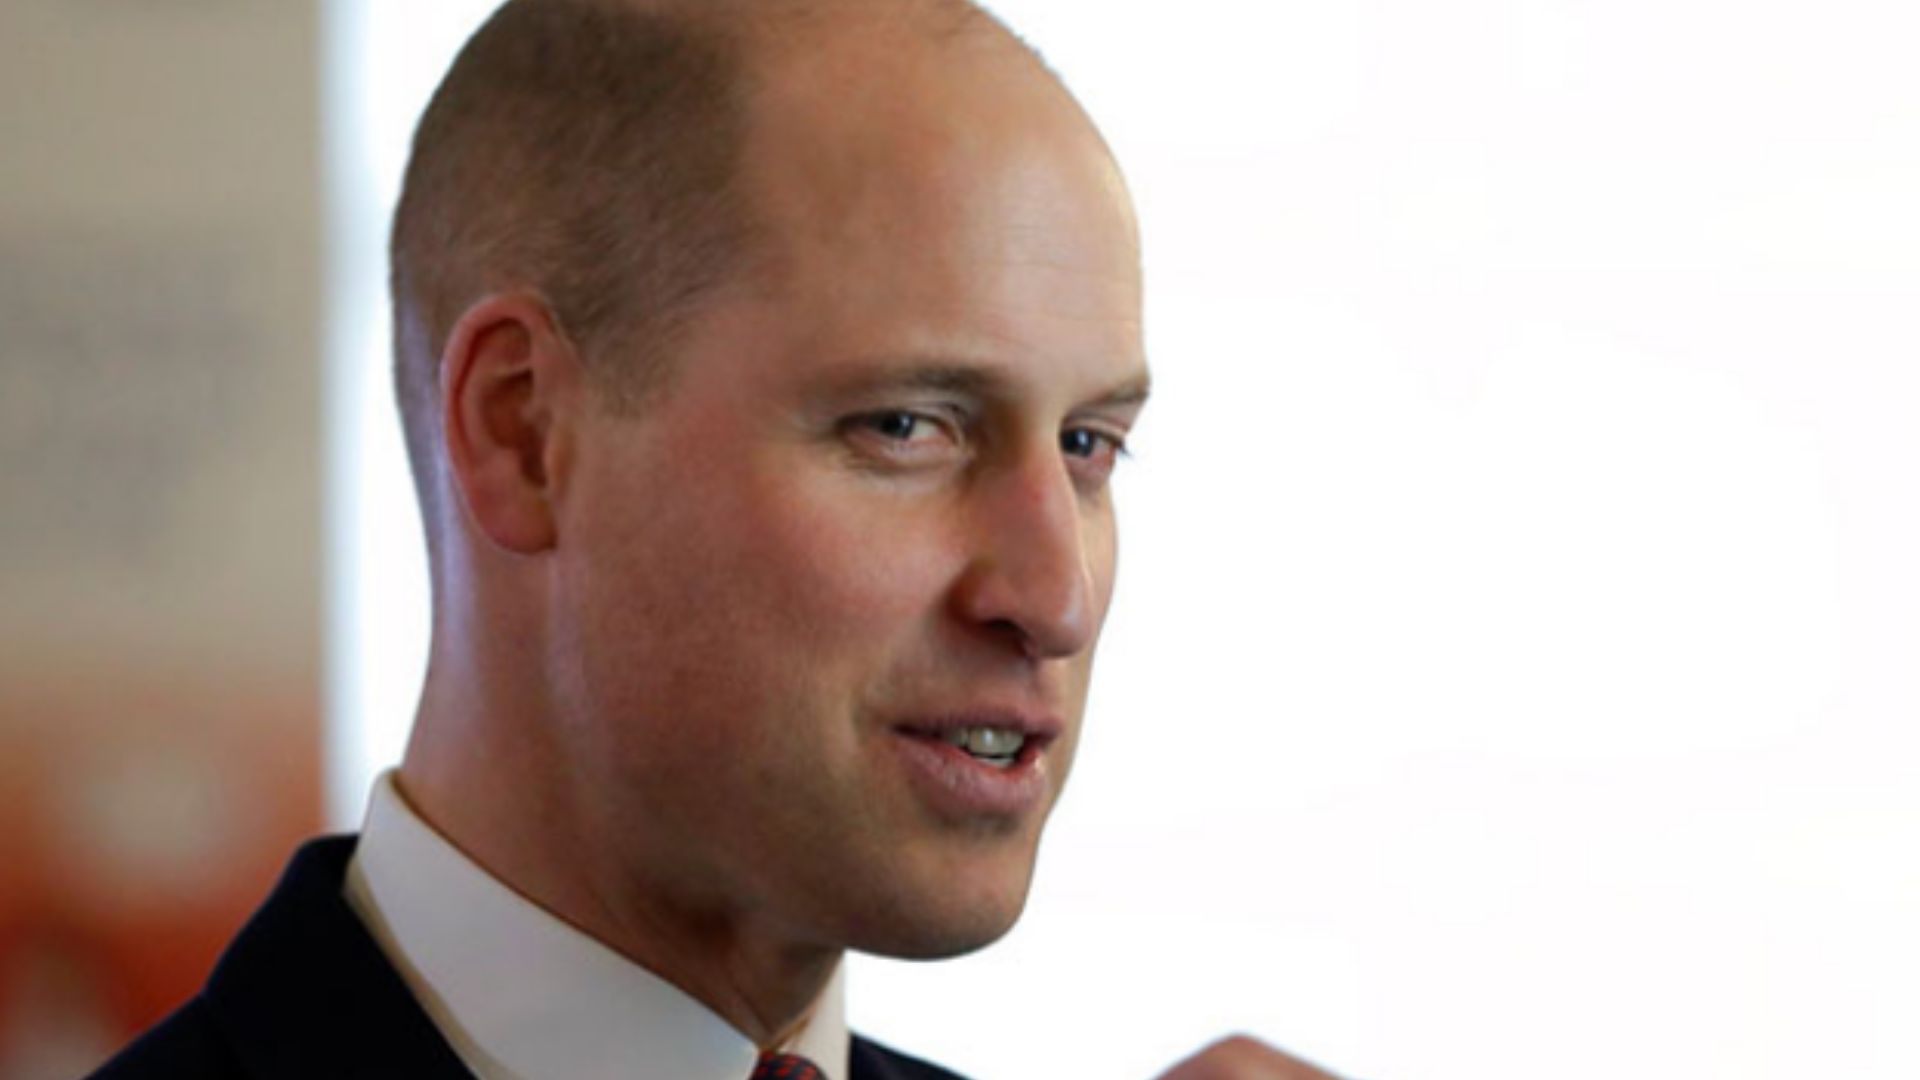 Prince William spotted trading homeless magazine in London